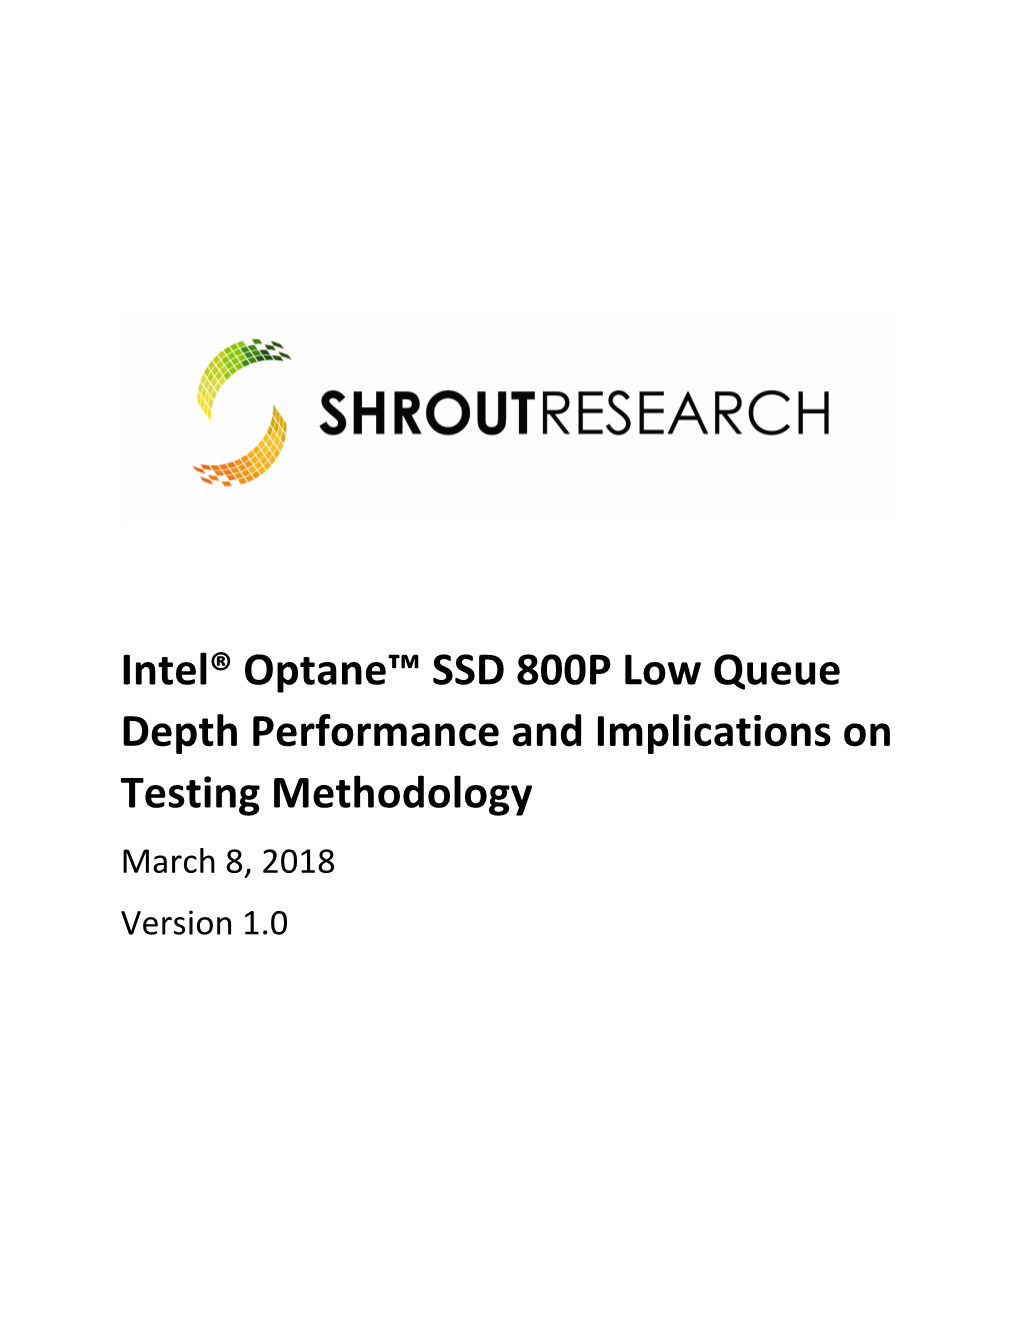 Intel® Optane™ SSD 800P Low Queue Depth Performance and Implications on Testing Methodology March 8, 2018 Version 1.0